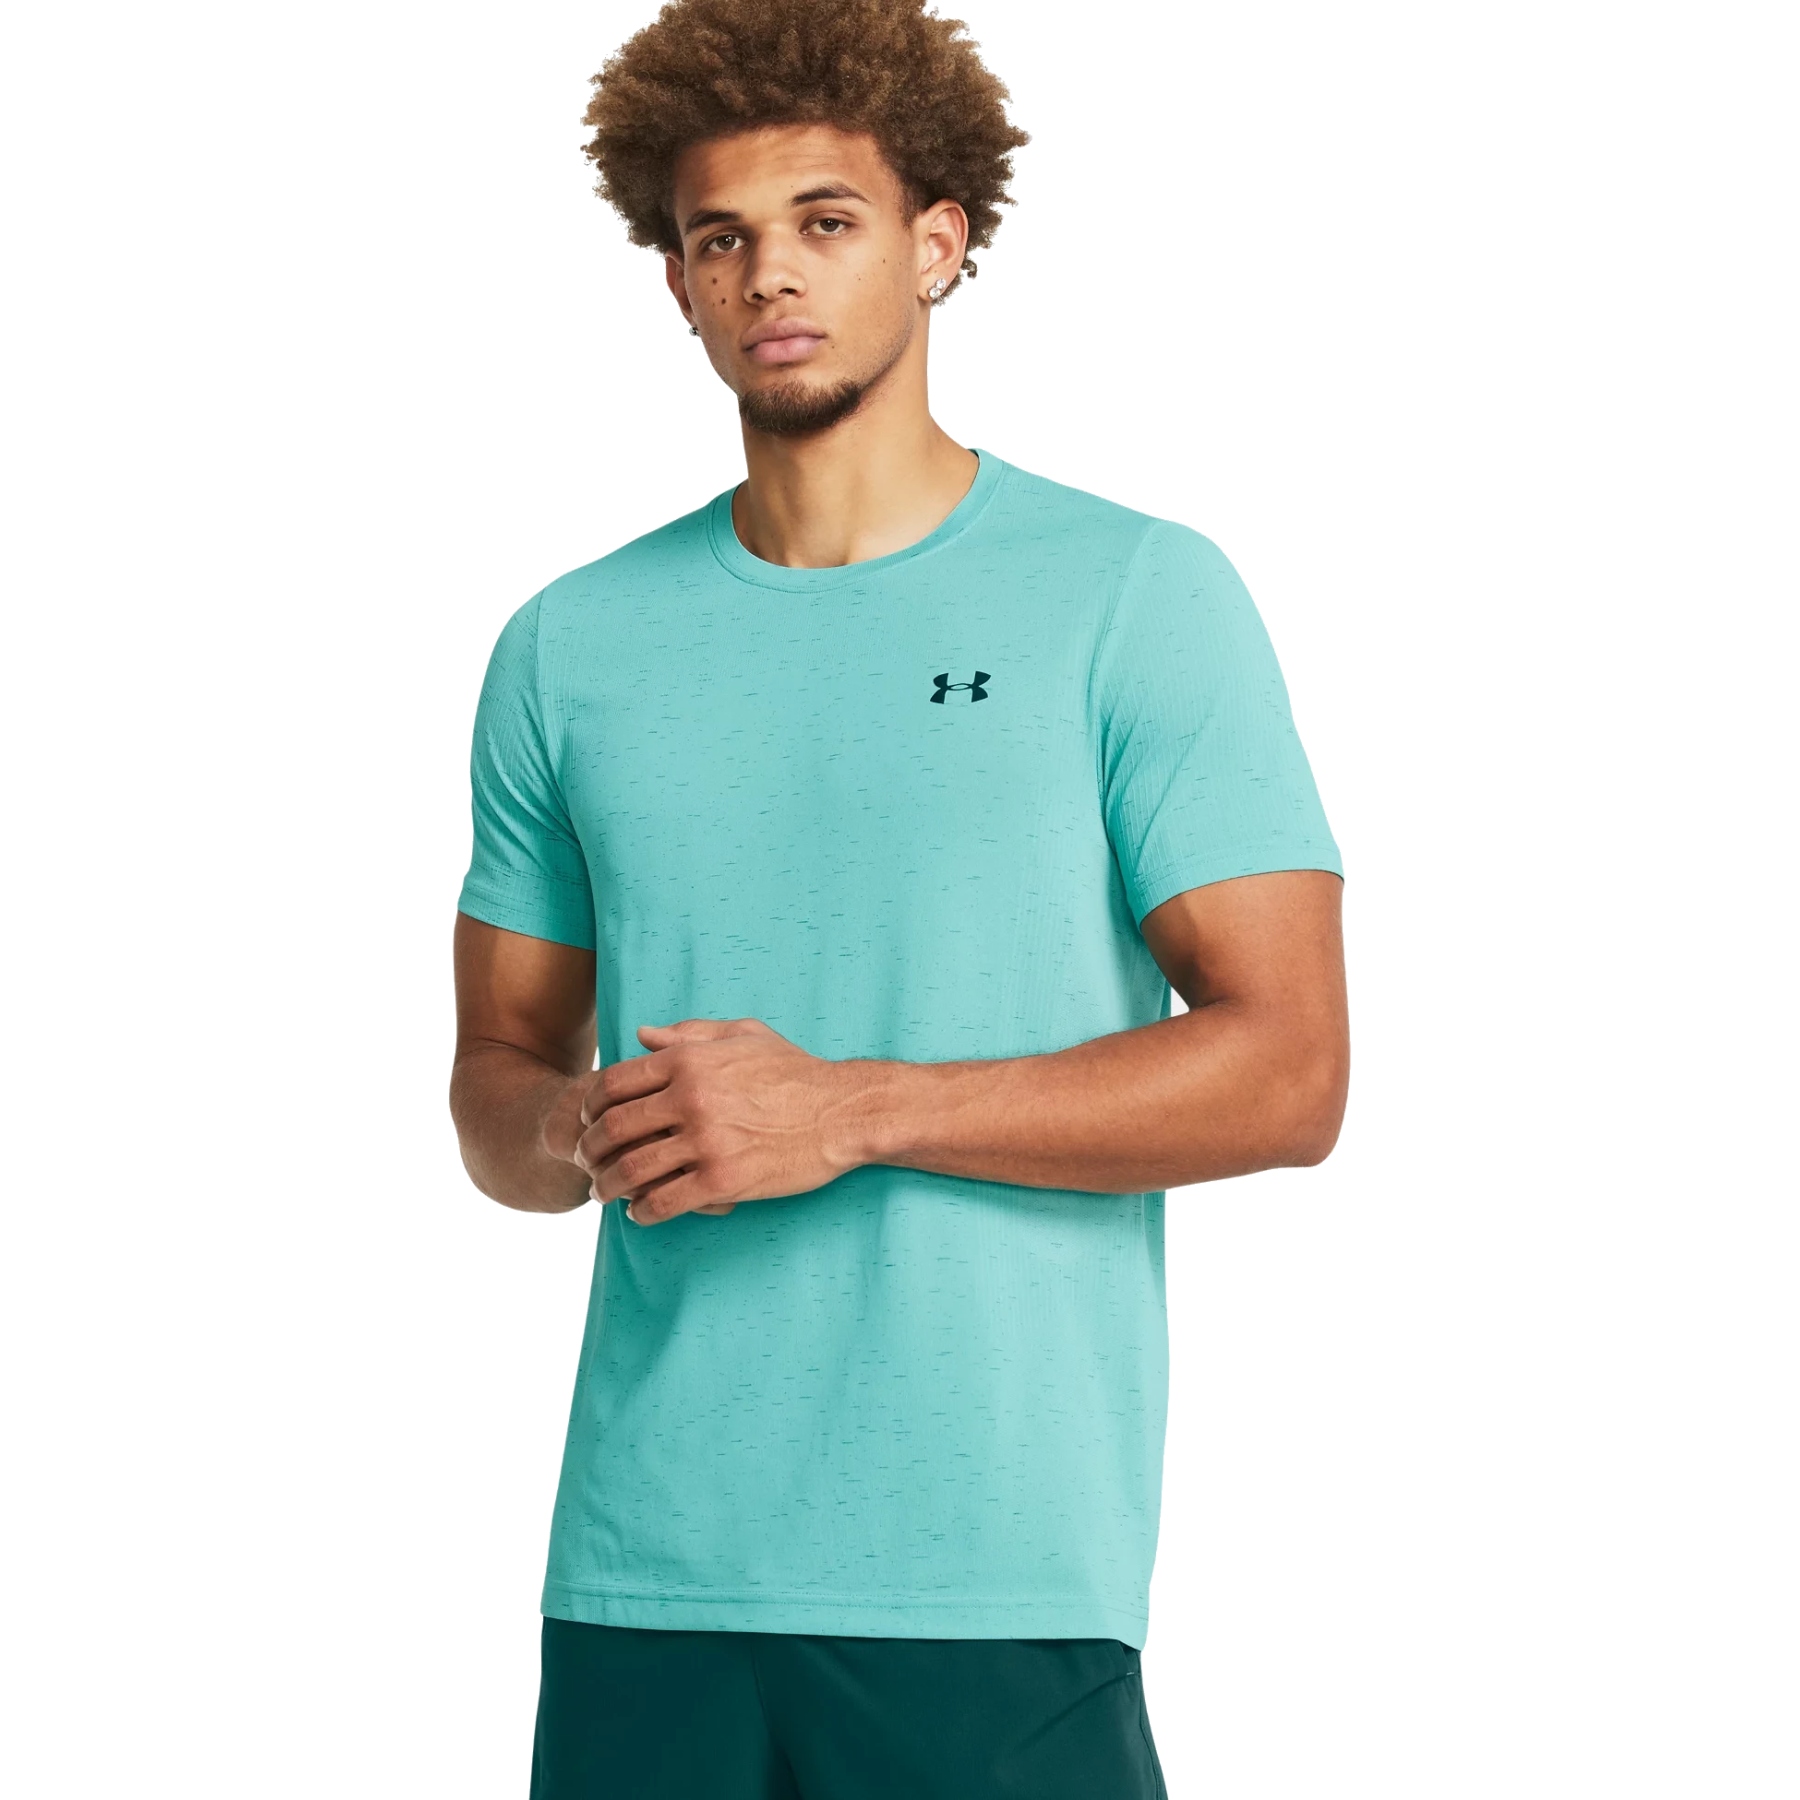 Picture of Under Armour UA Vanish Seamless Short Sleeve Shirt Men - Radial Turquoise/Hydro Teal